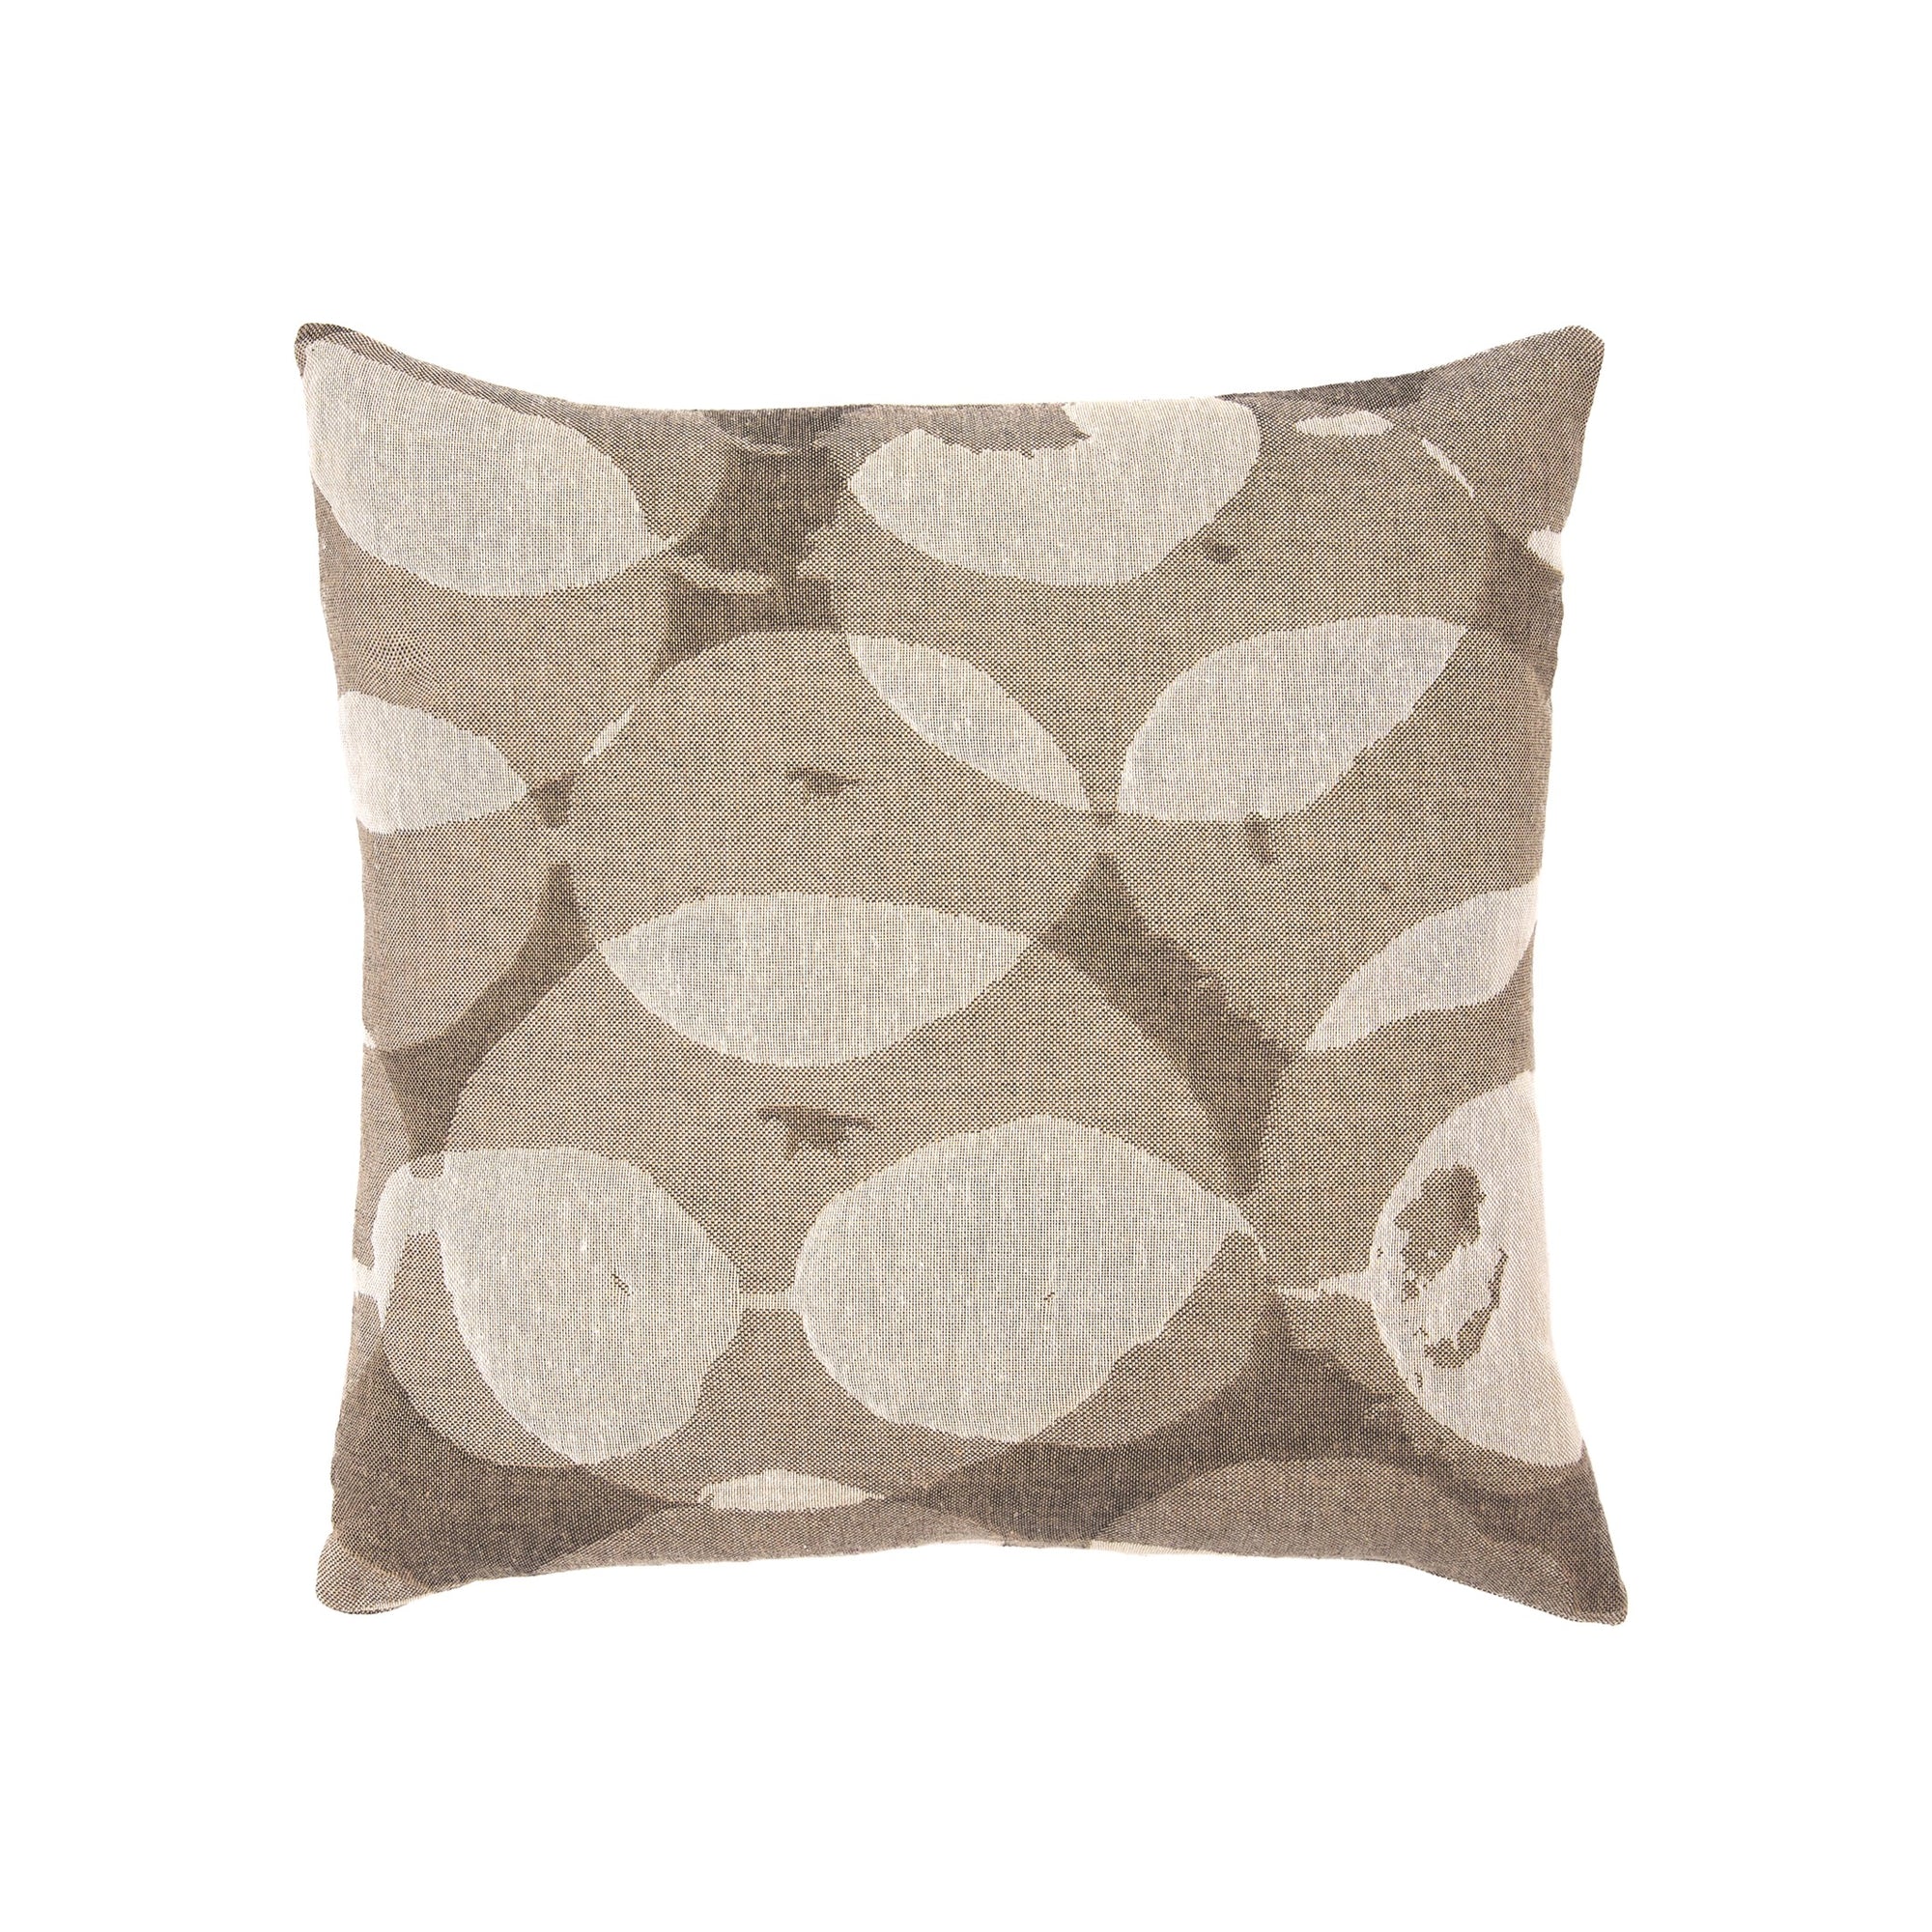 Connected Dots cushion